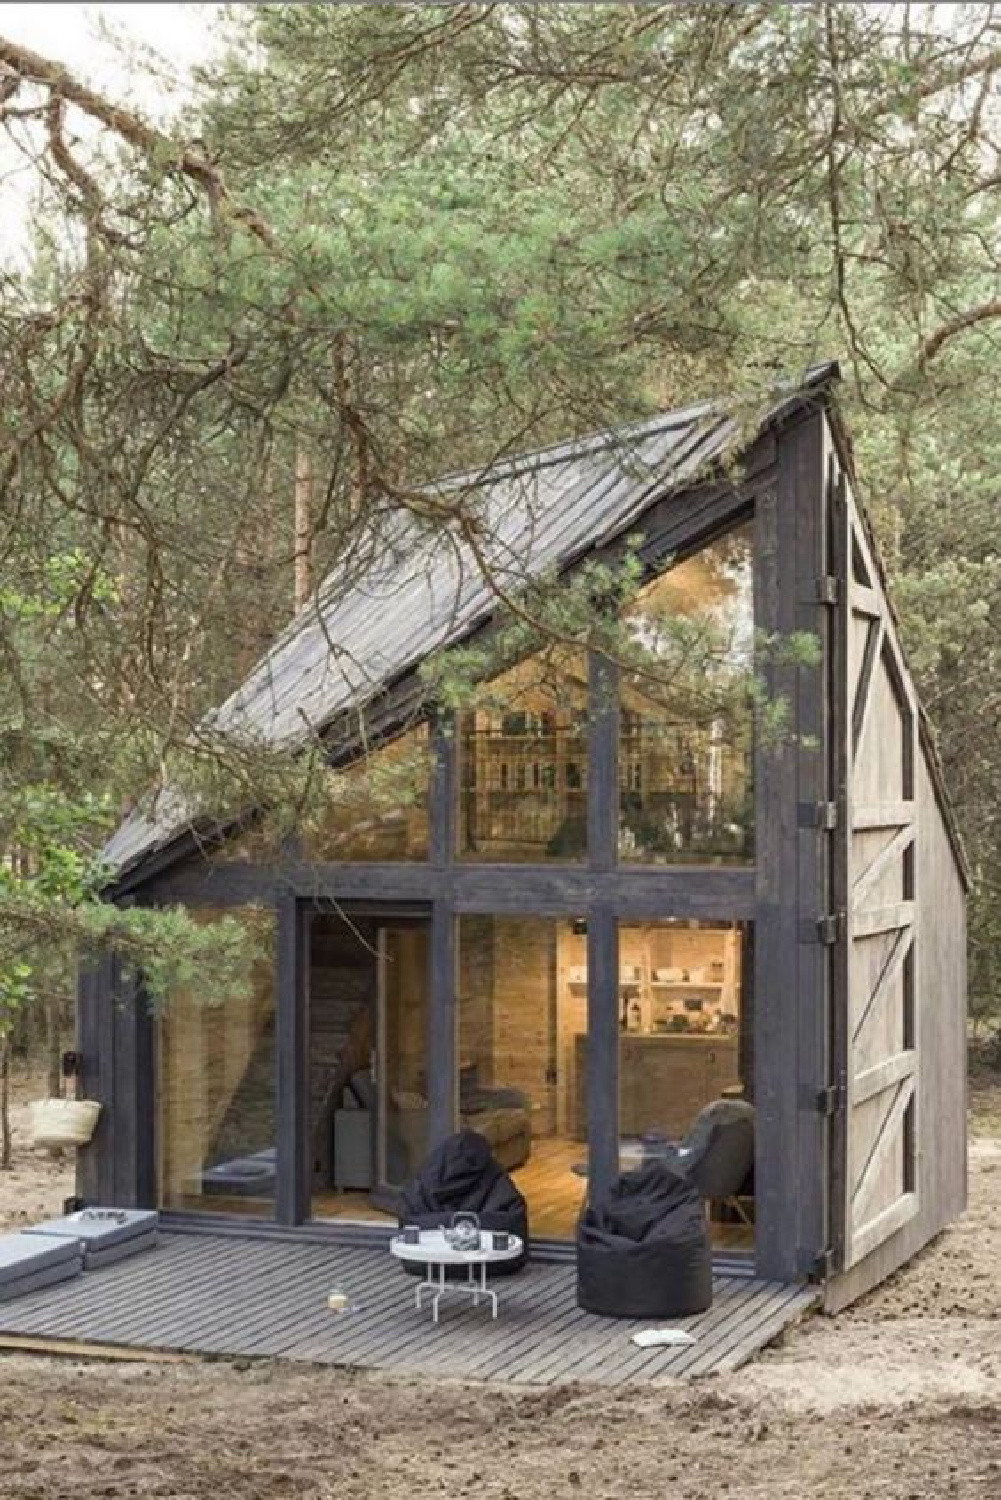 Modern rustic tiny house with two floors of woodsy warmth, walls of windows, and exquisite architecture - @settdesign. #tinyhousearchitecture #tinyhouseexteriors #modernrusticcabin